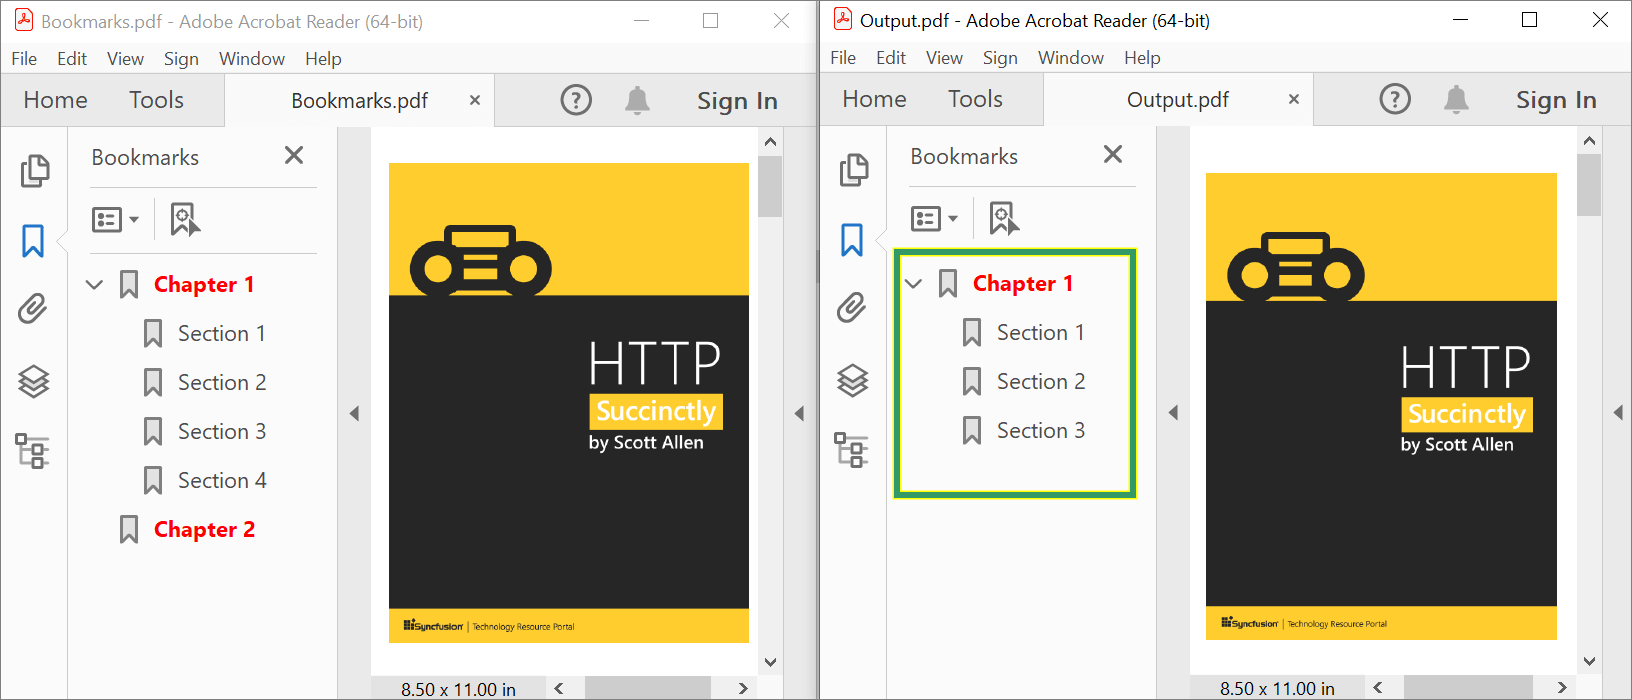 Remove bookmarks from the existing PDF document using C#